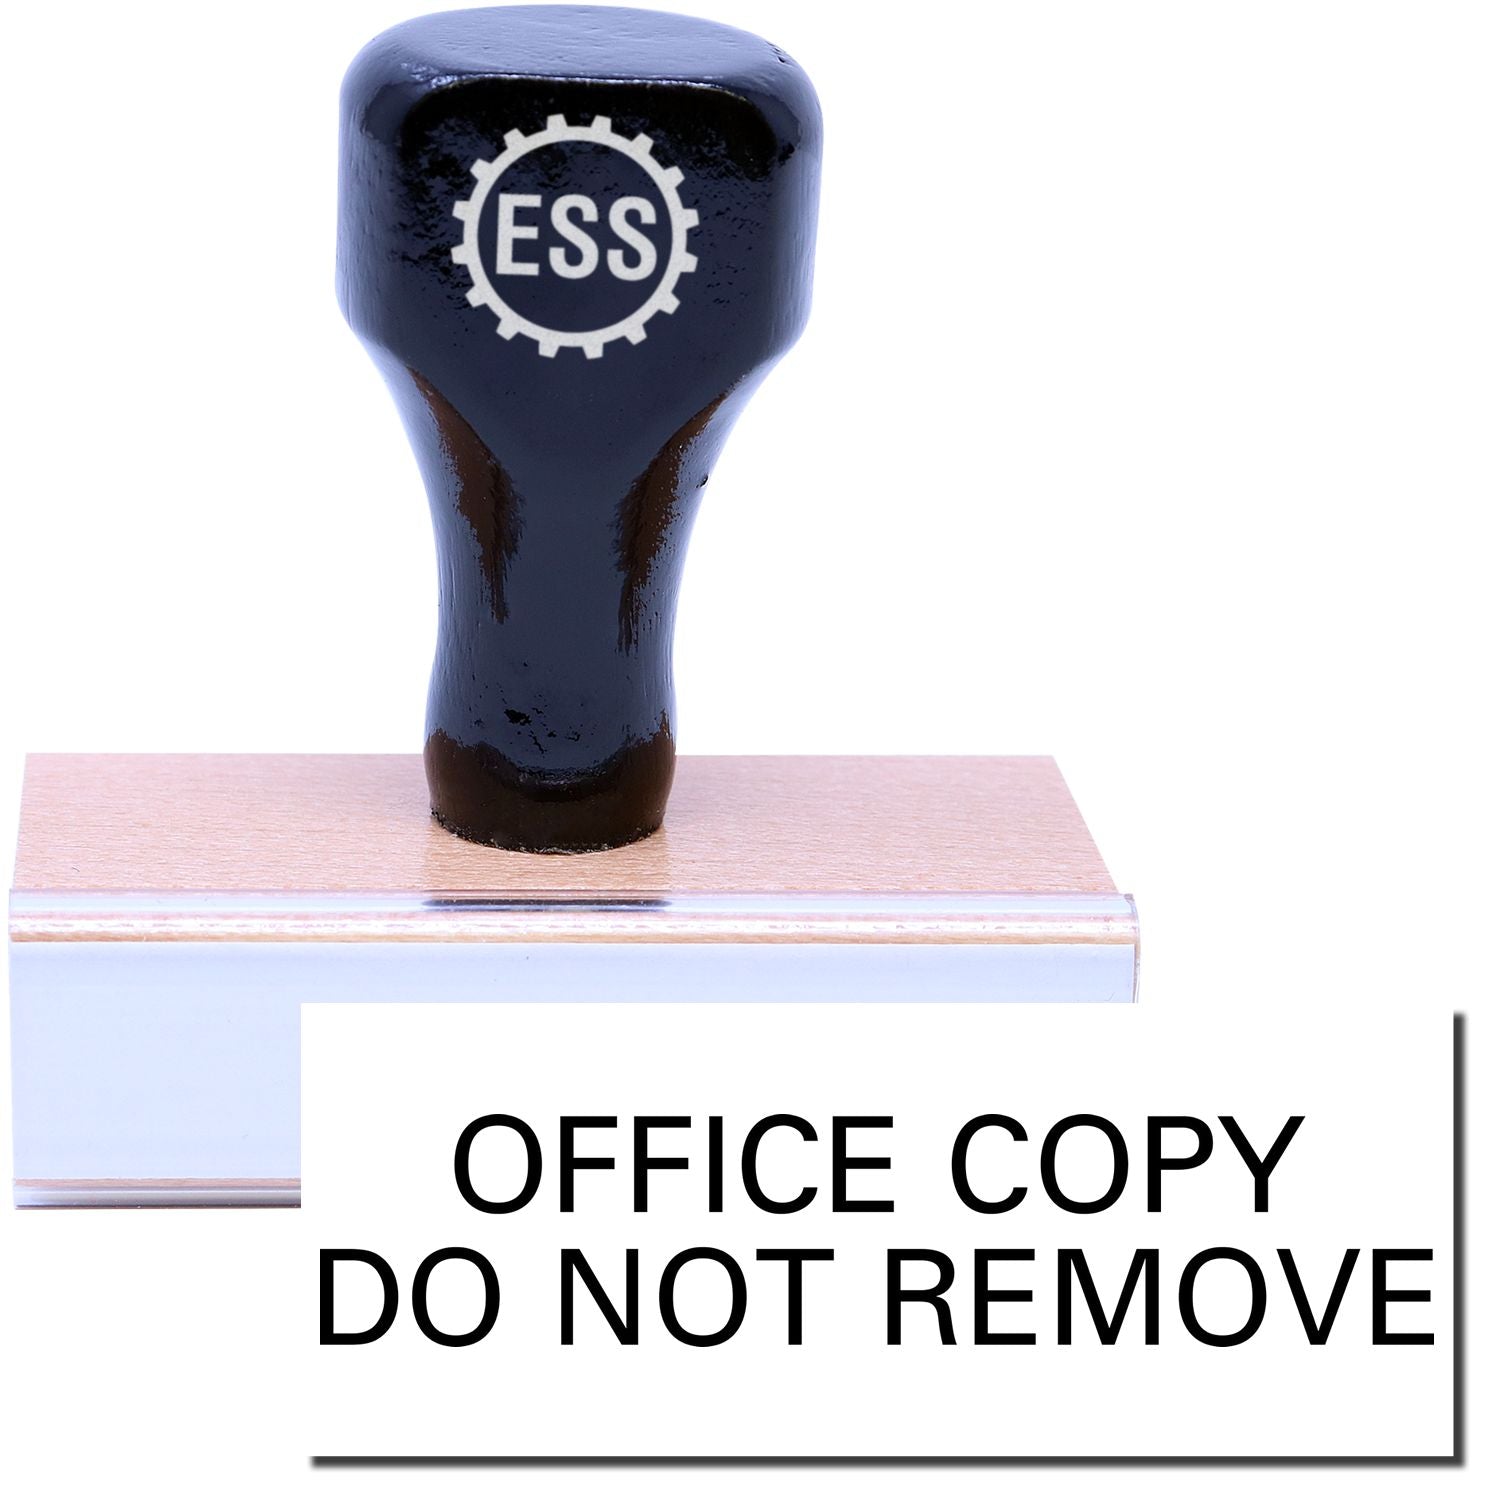 A stock office rubber stamp with a stamped image showing how the text "OFFICE COPY DO NOT REMOVE" in a large font is displayed after stamping.